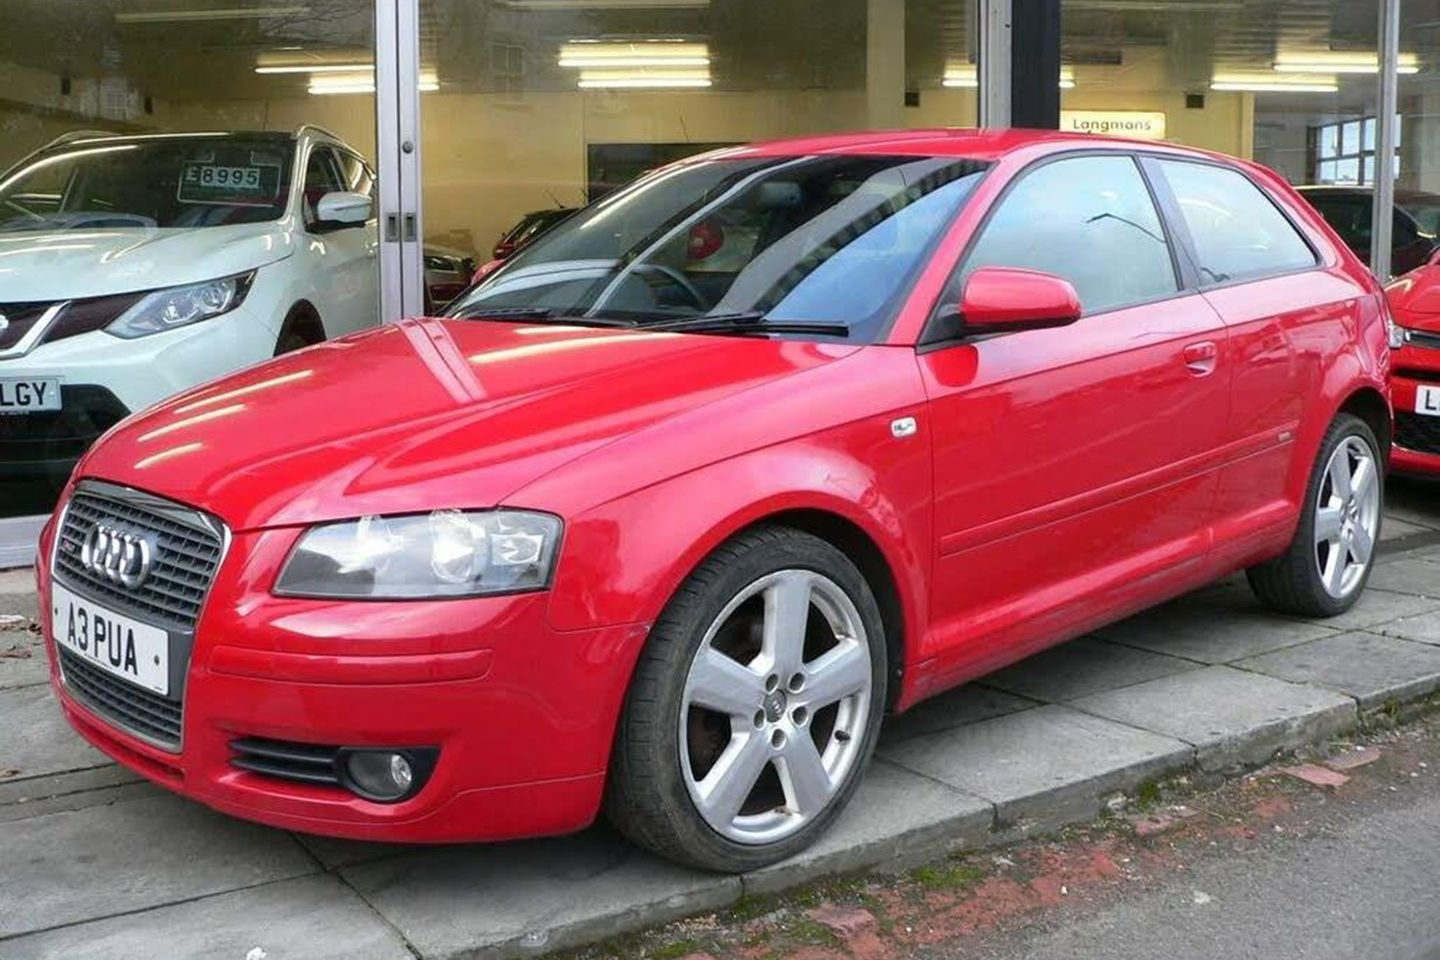 audi a3 quattro germany 8p used – Search for your used car on the parking